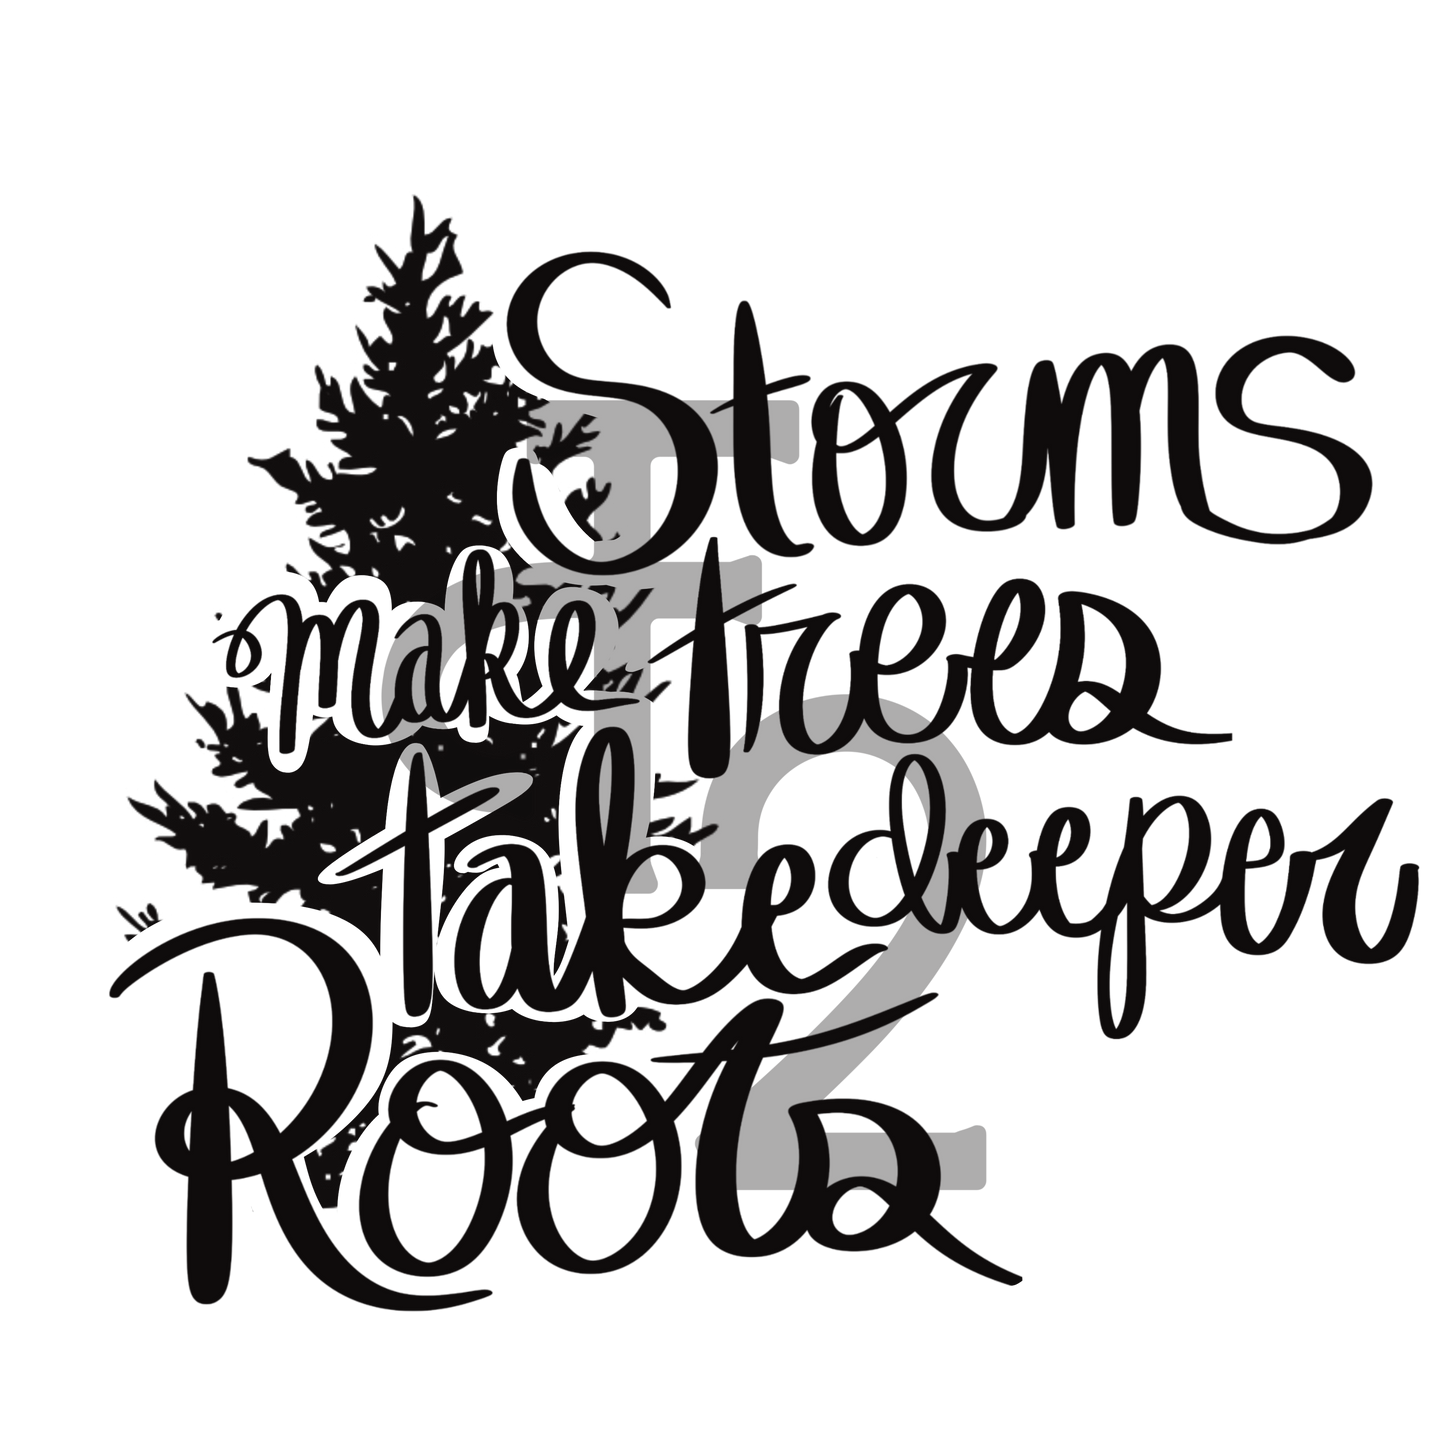 Storms Make Trees Take Deeper Roots